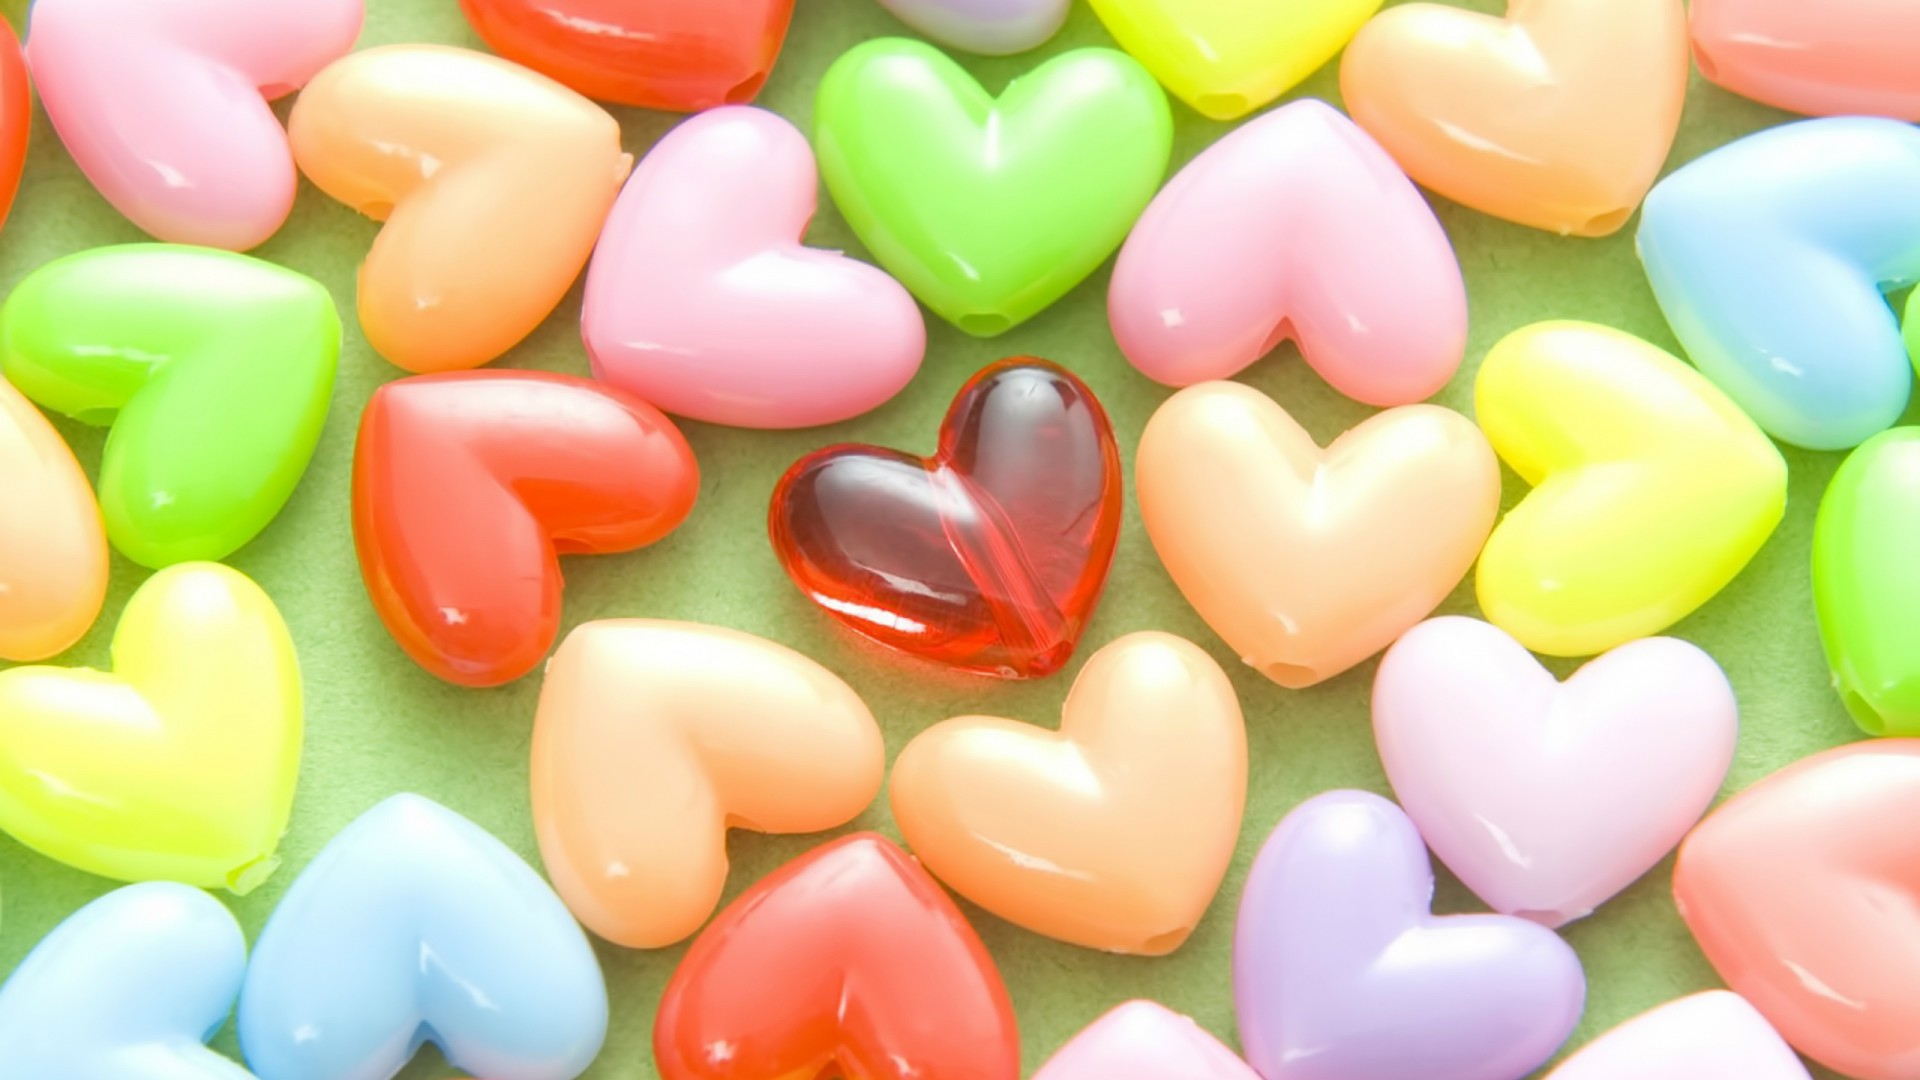 wallpaper love wallpaper,sweetness,jelly bean,confectionery,candy,heart